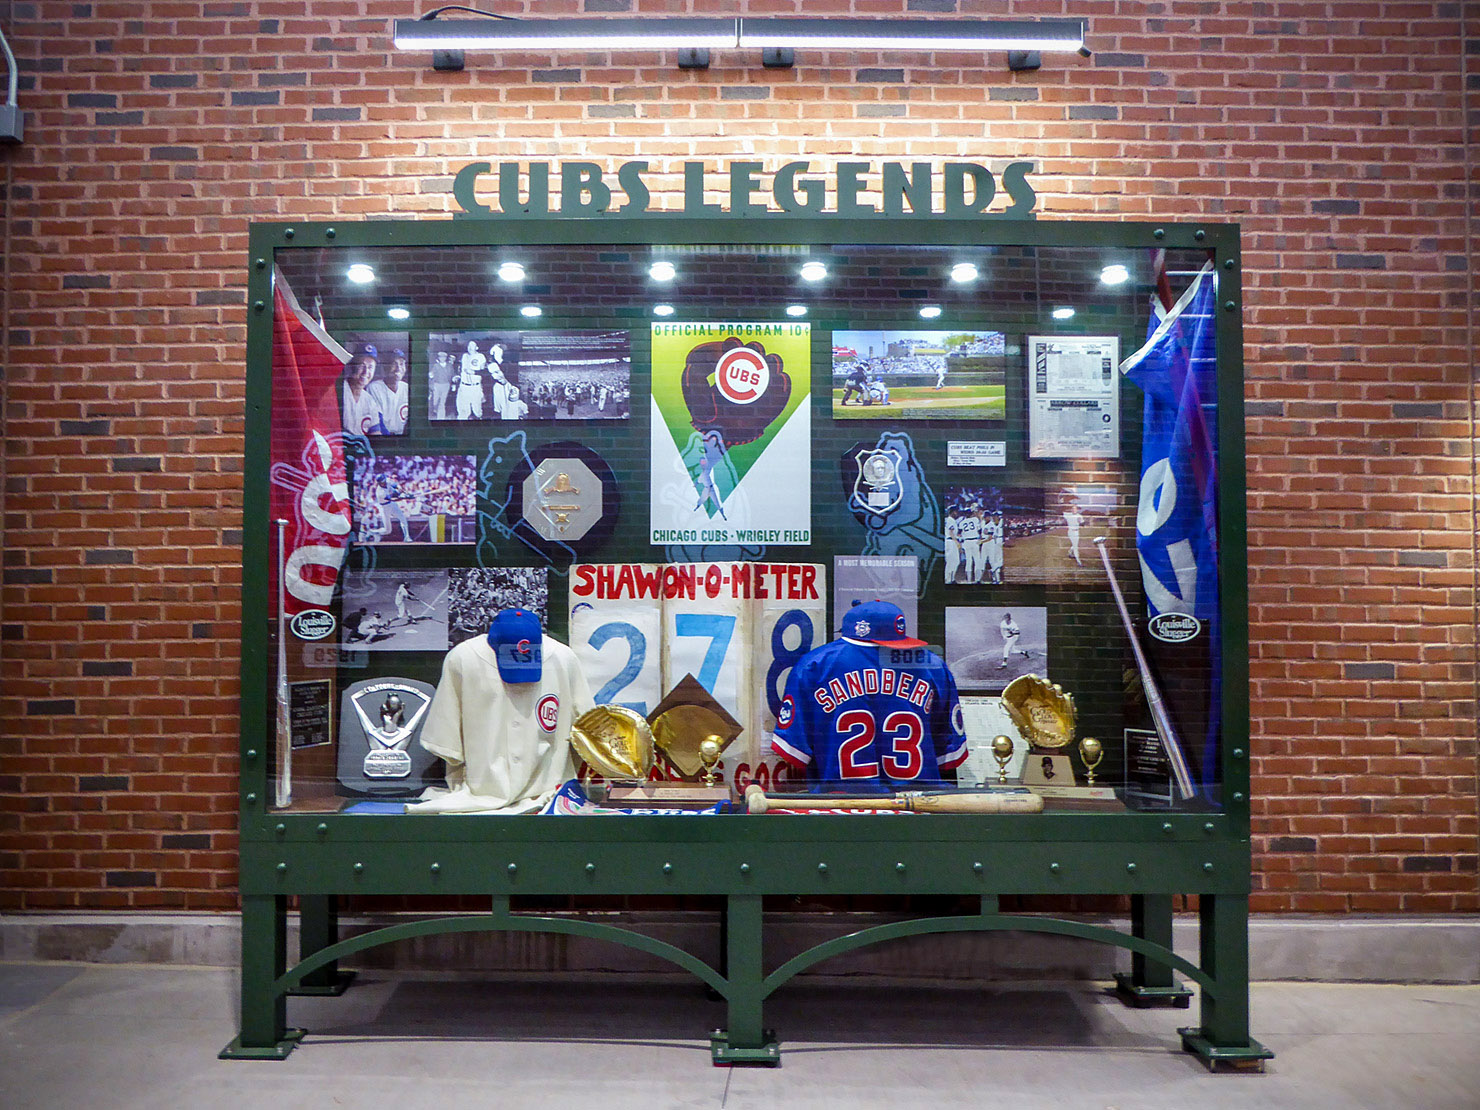 The Cubs — with no fans in the Wrigley Field bleachers — fill the space  with advertising signage